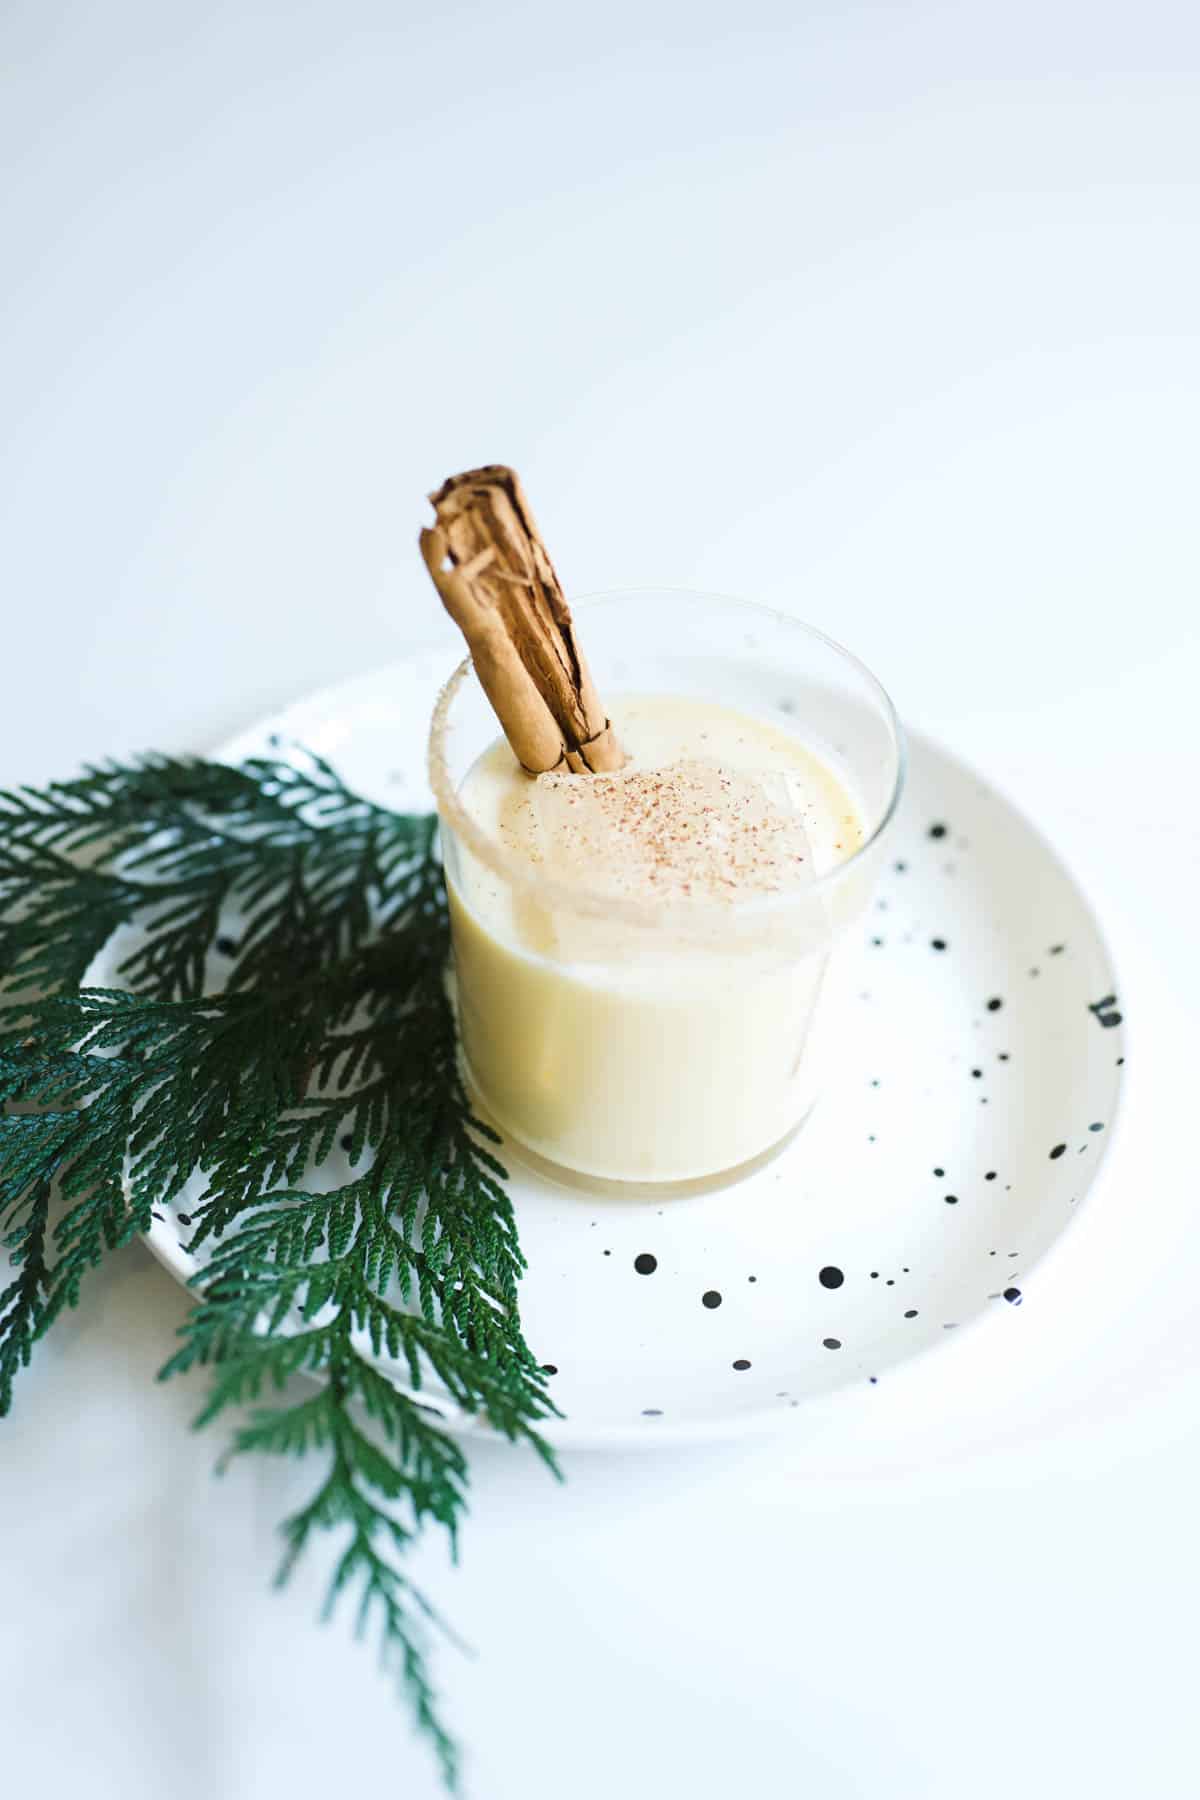 A Fireball Eggnog cocktail in a cup on a table with a cinnamon stick garnish.